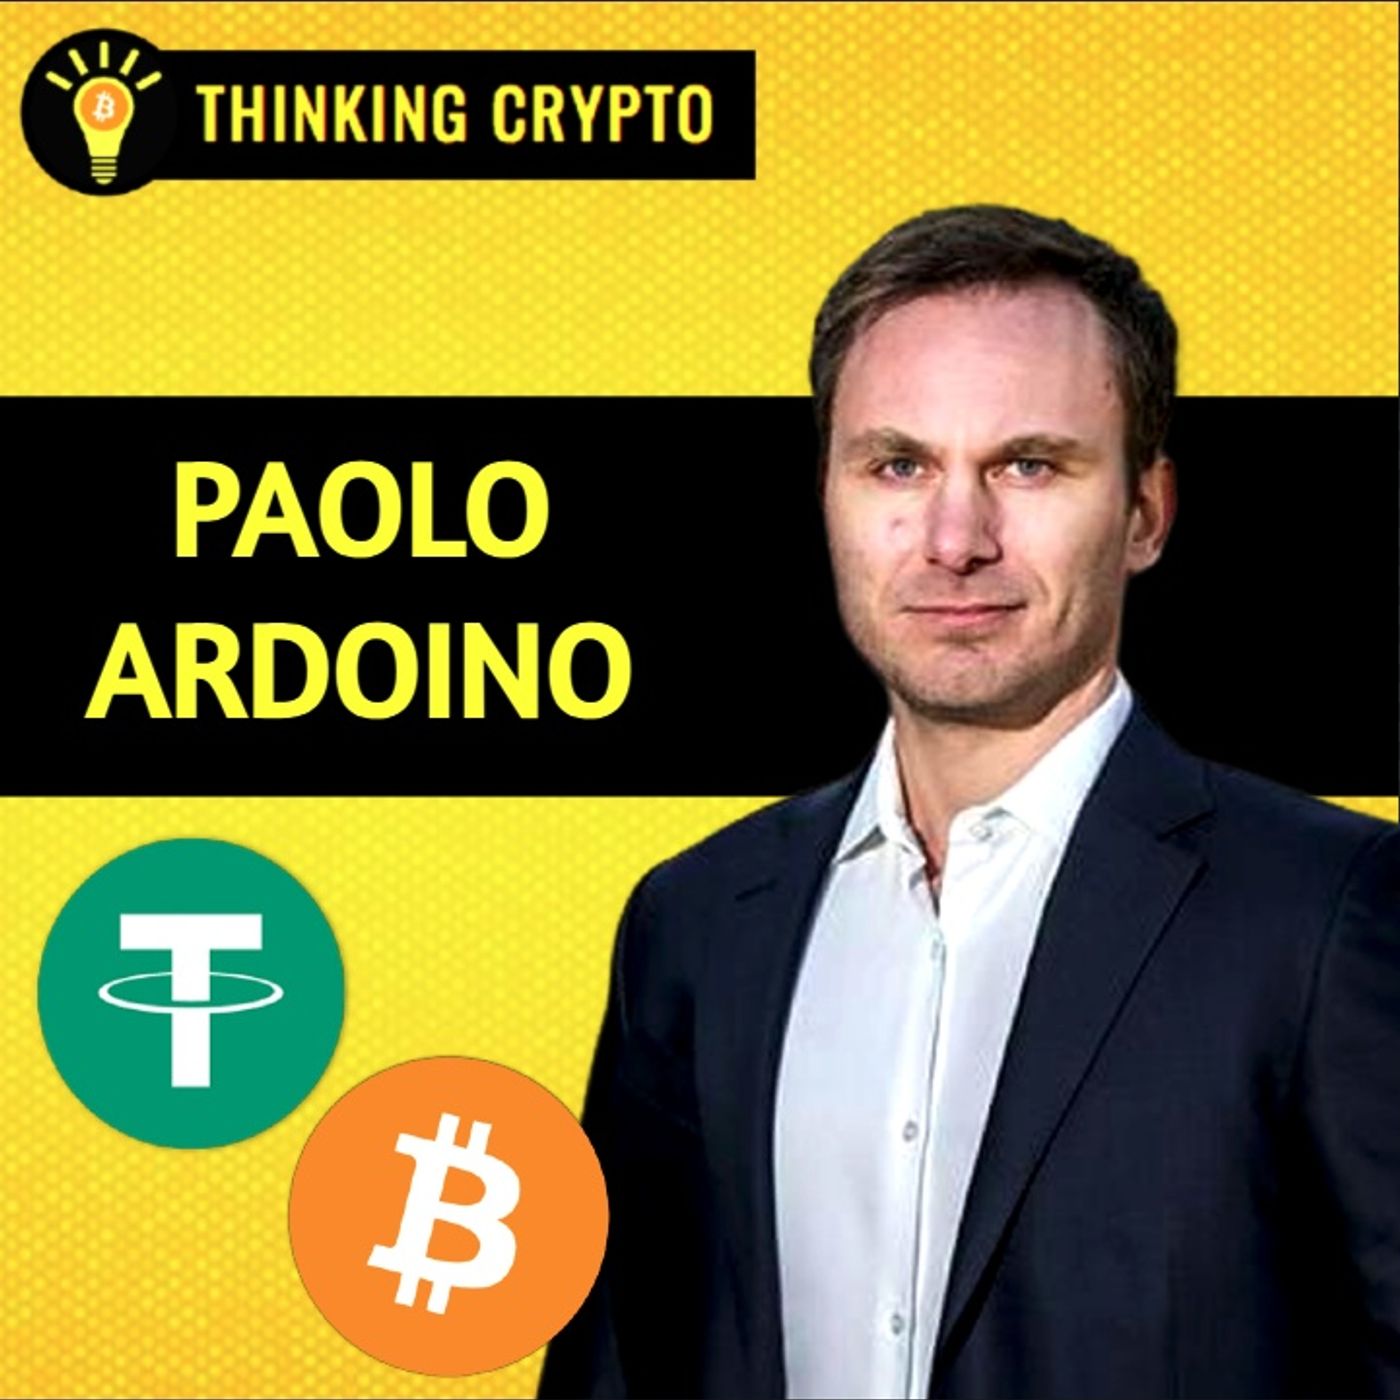 Paolo Ardoino Interview - Tether USDT's Rise To The World's Largest Stablecoin & Future Outlook